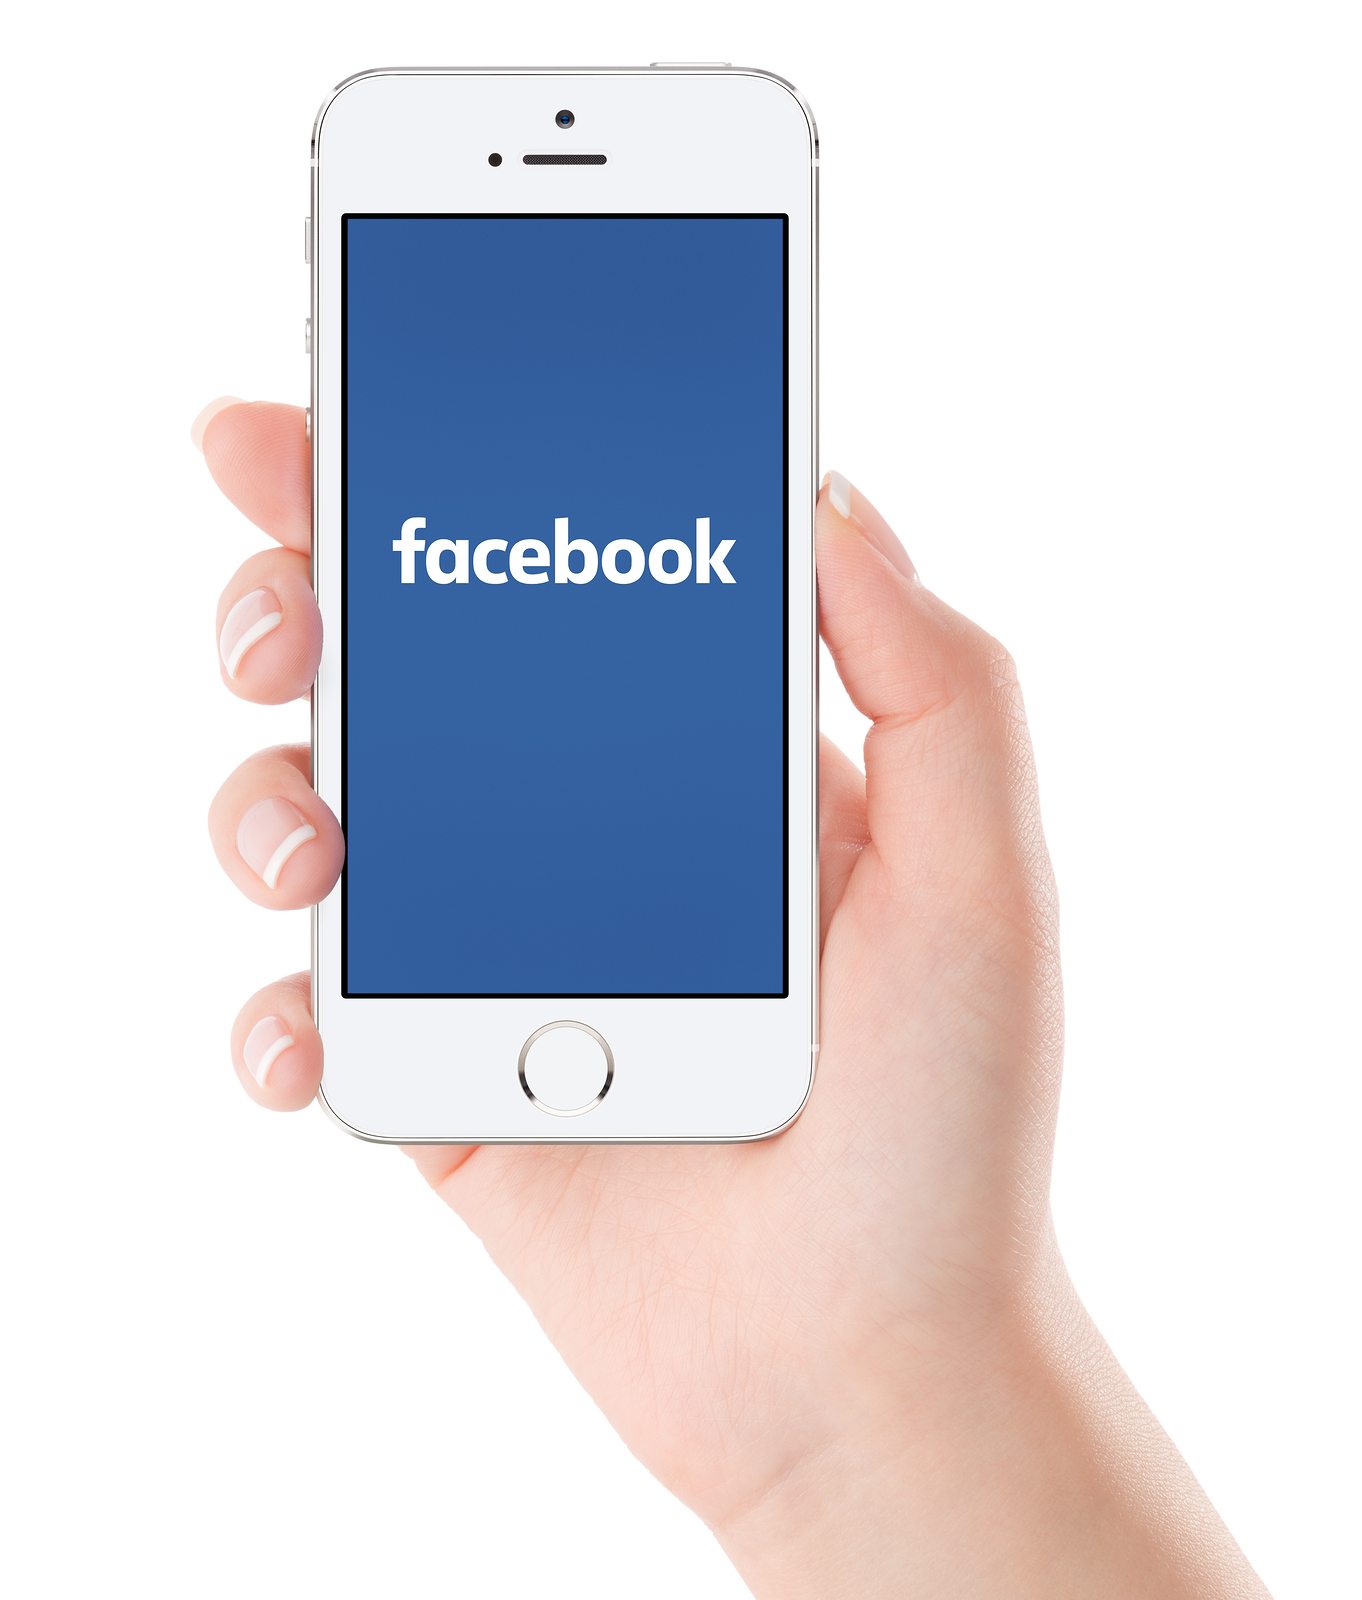 Facebook Logo On The White Apple Iphone 5S Display In Female Han